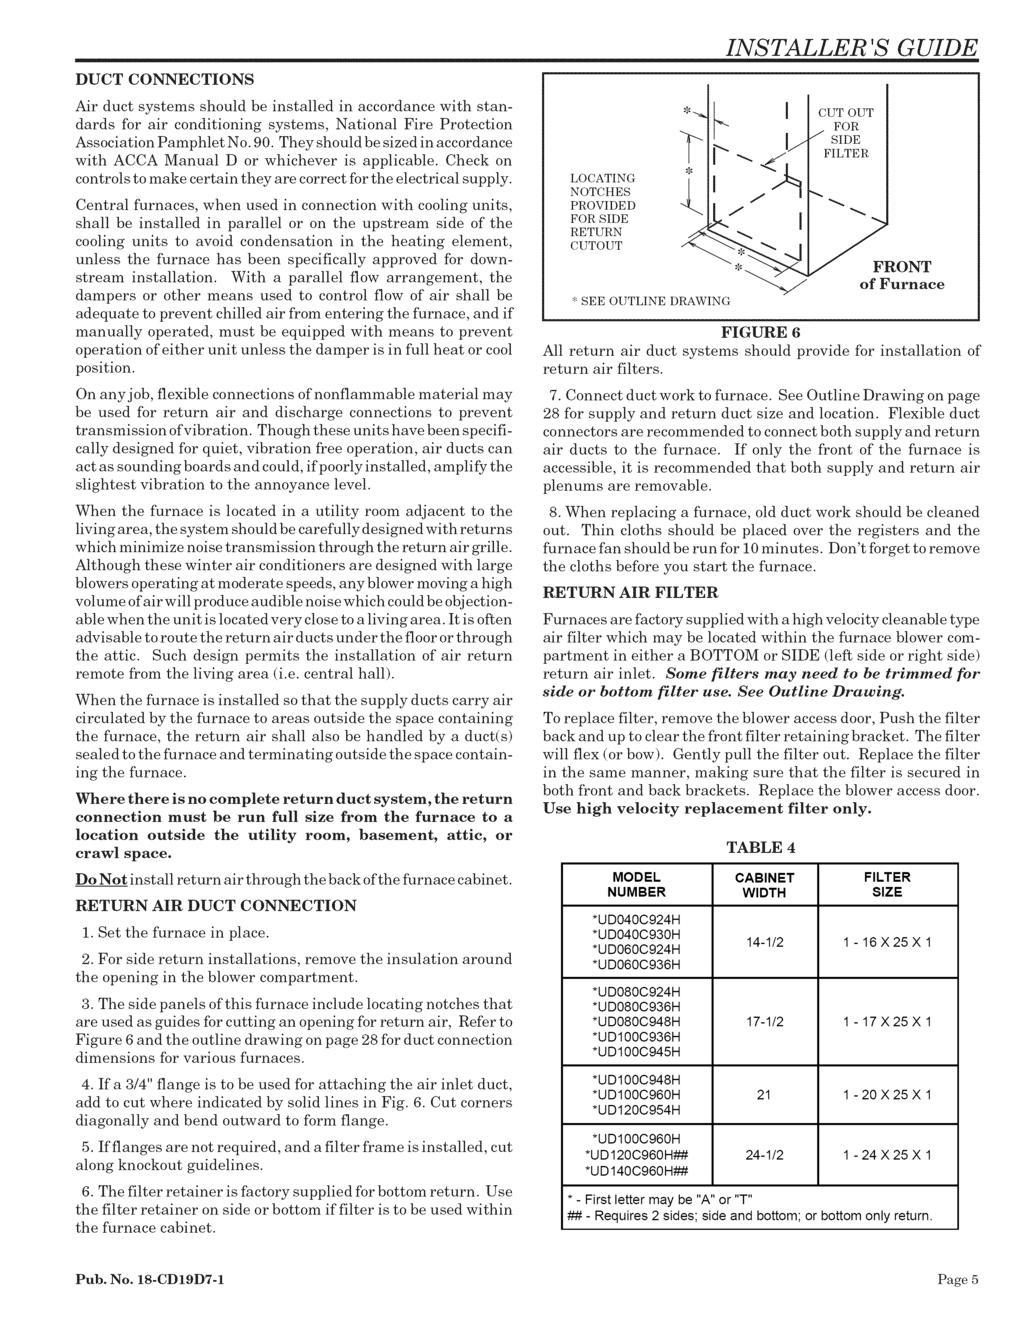 DUCT CONNECTIONS Air duct systems should be installed in accordance with standards for air conditioning systems, National Fire Protection Association Pamphlet No. 90.